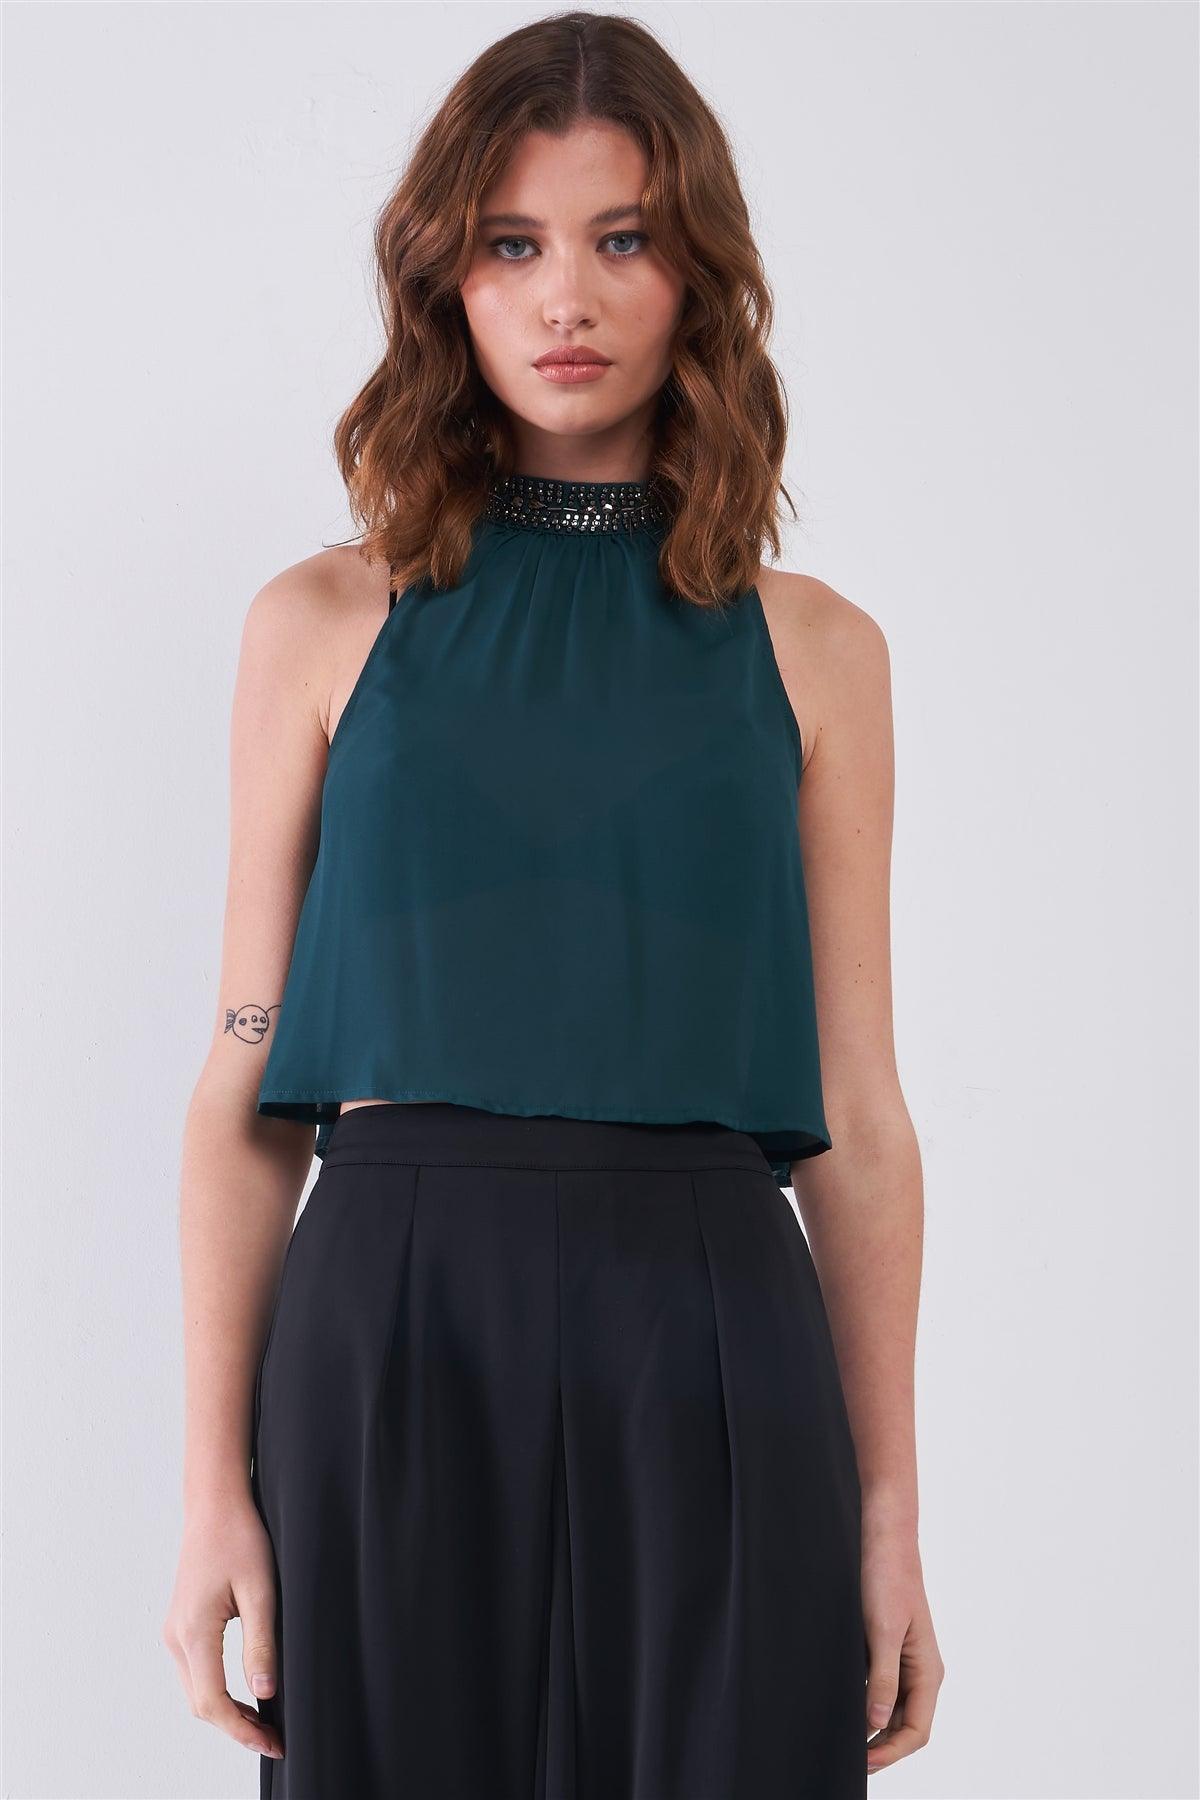 Hunter Green Sleeveless Beaded High Neck Pleated Front Crop Top /1-2-1-2